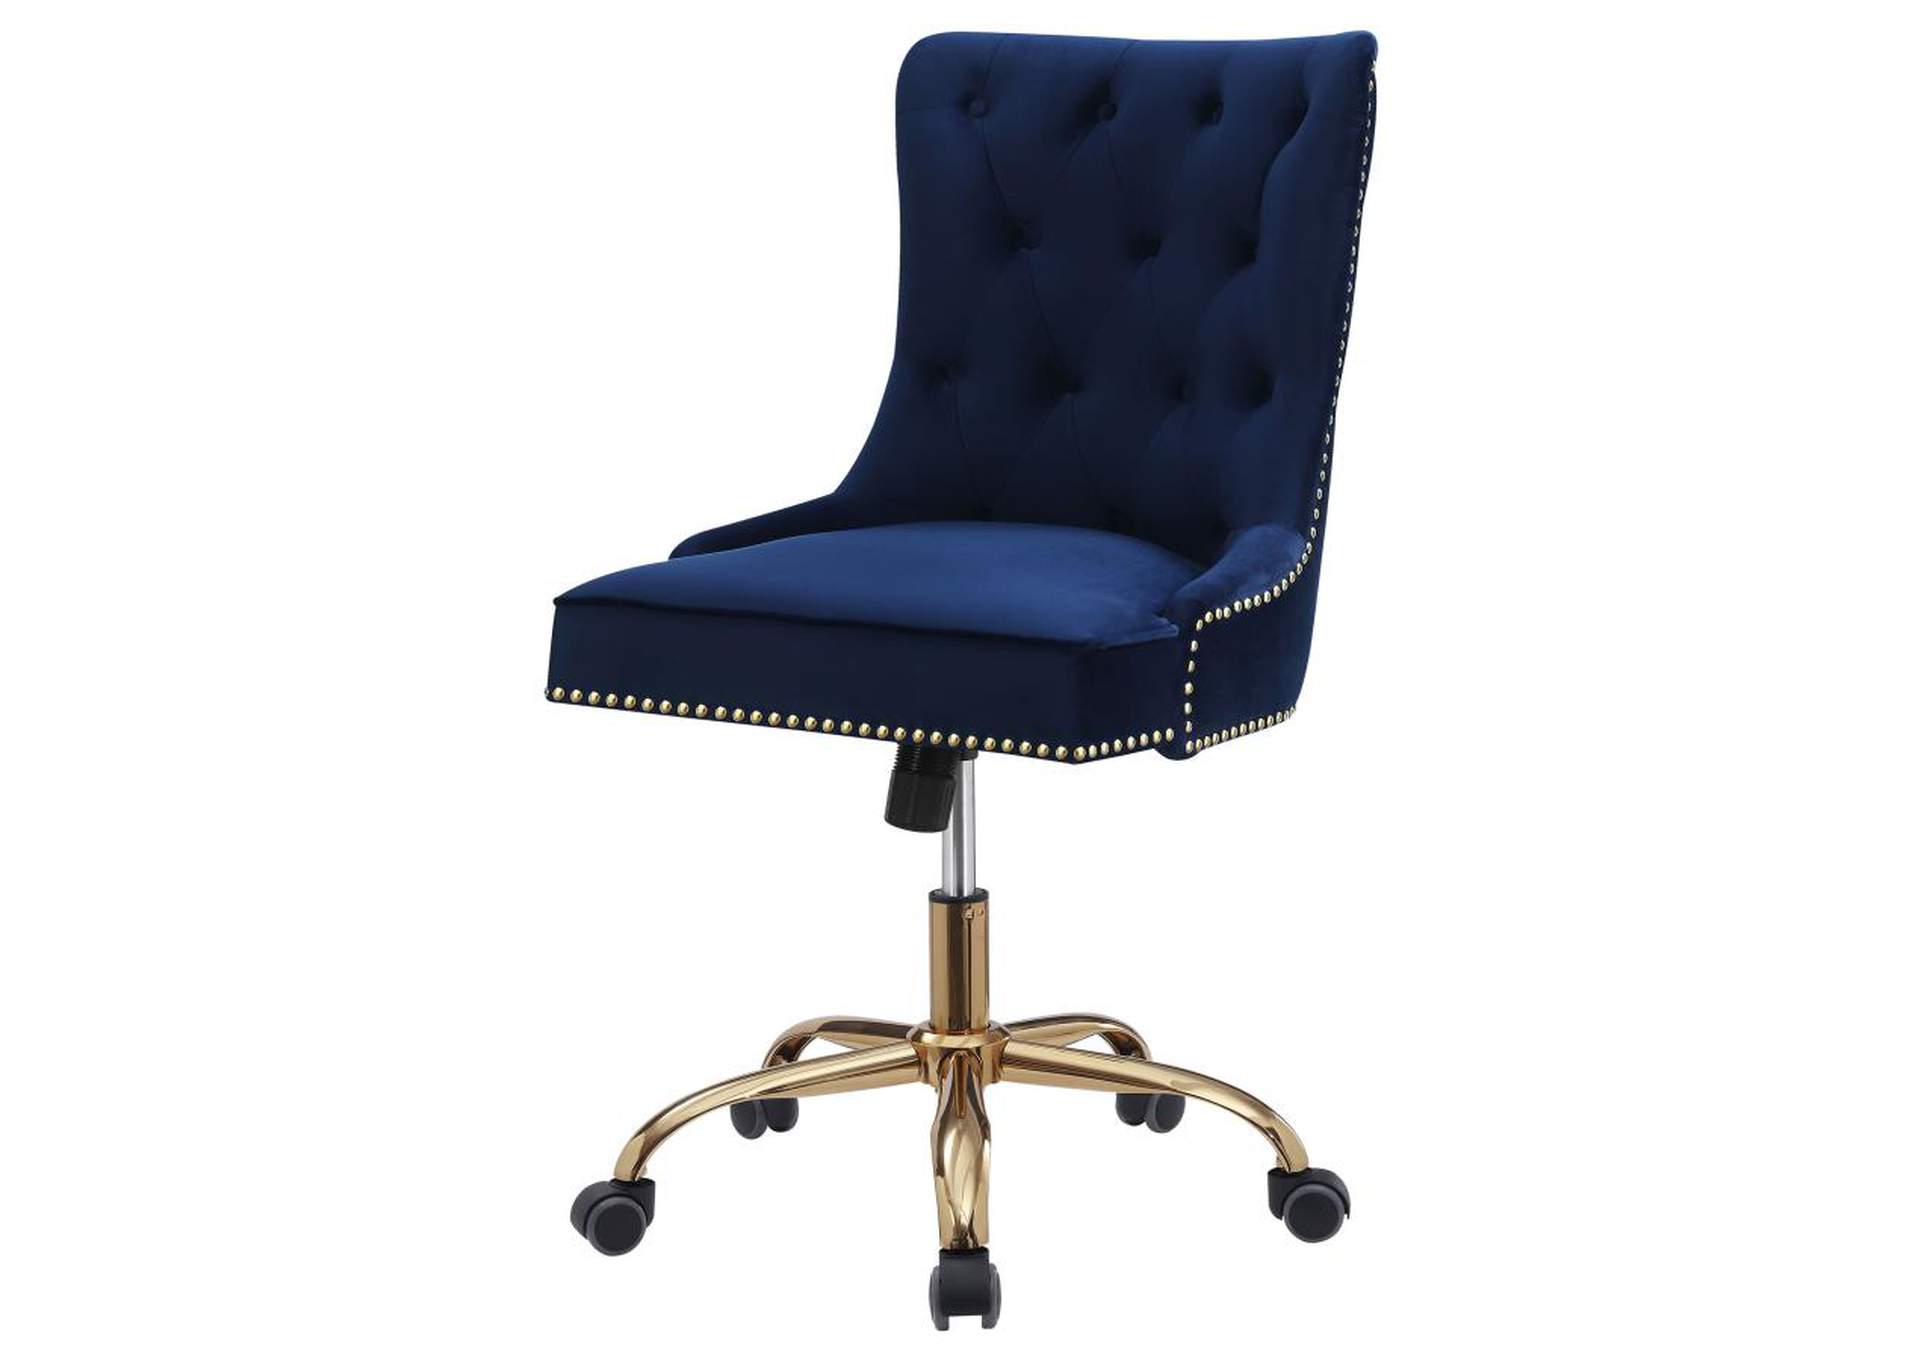 Bowie Upholstered Office Chair with Nailhead Blue and Brass,Coaster Furniture